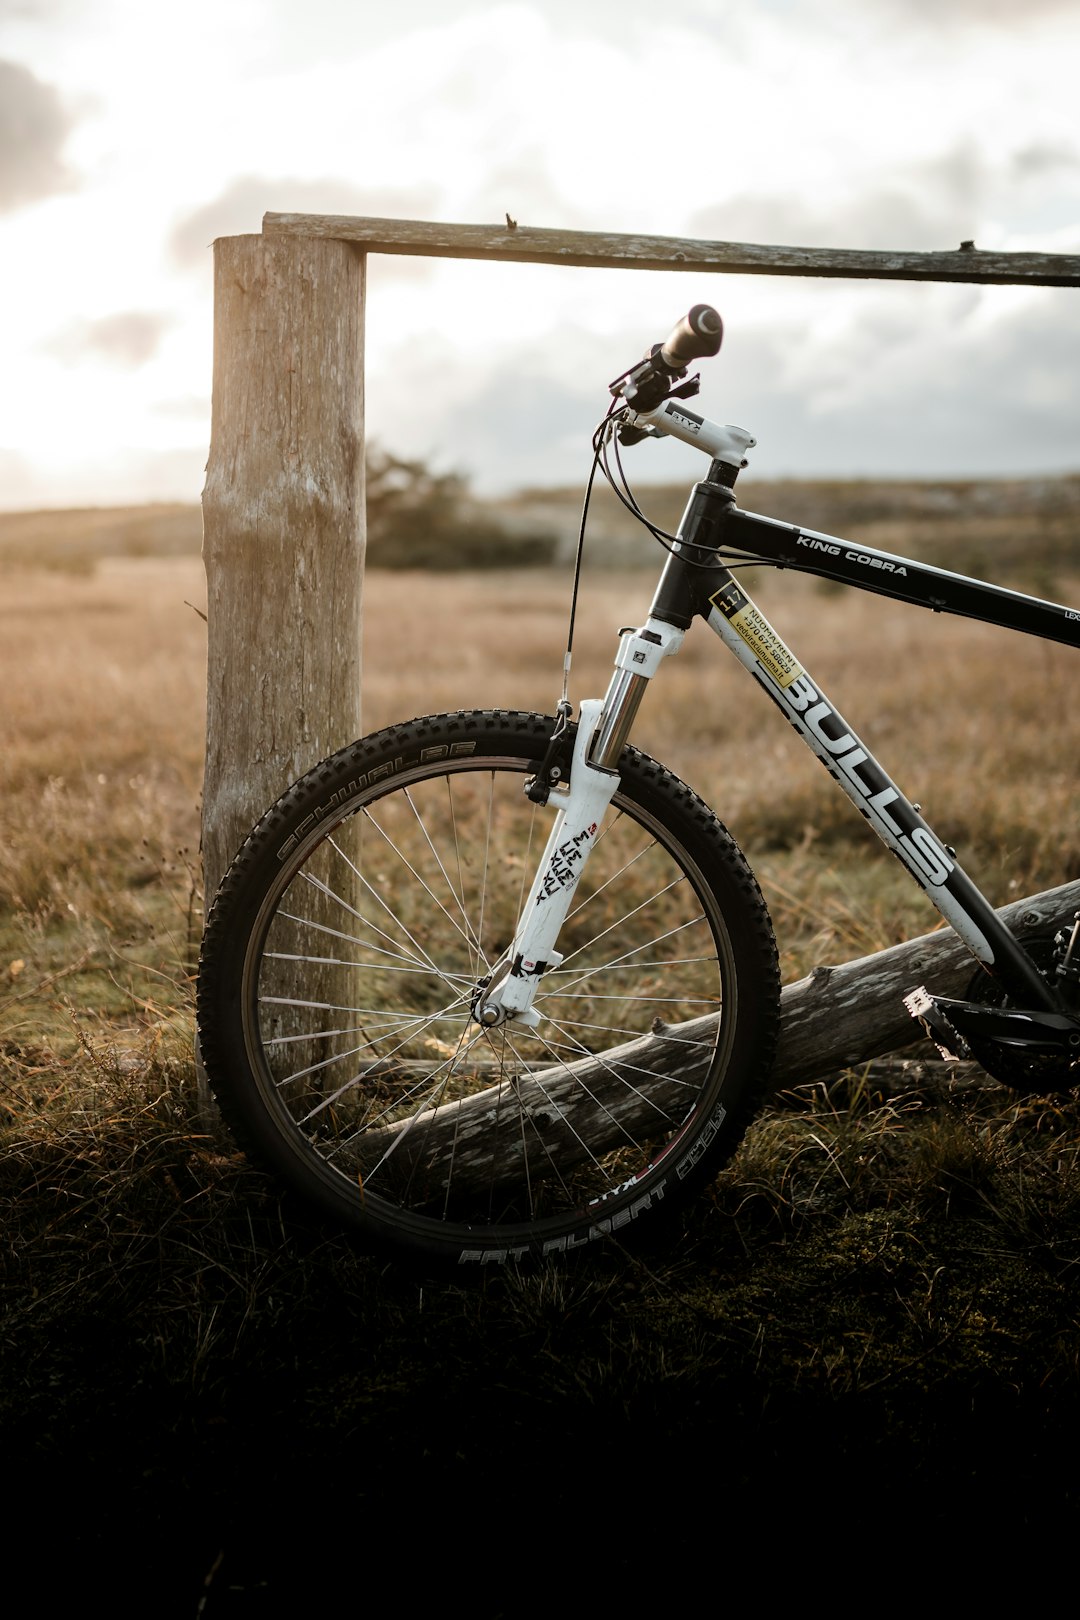 black and white mountain bike leaning on brown wooden post during daytime